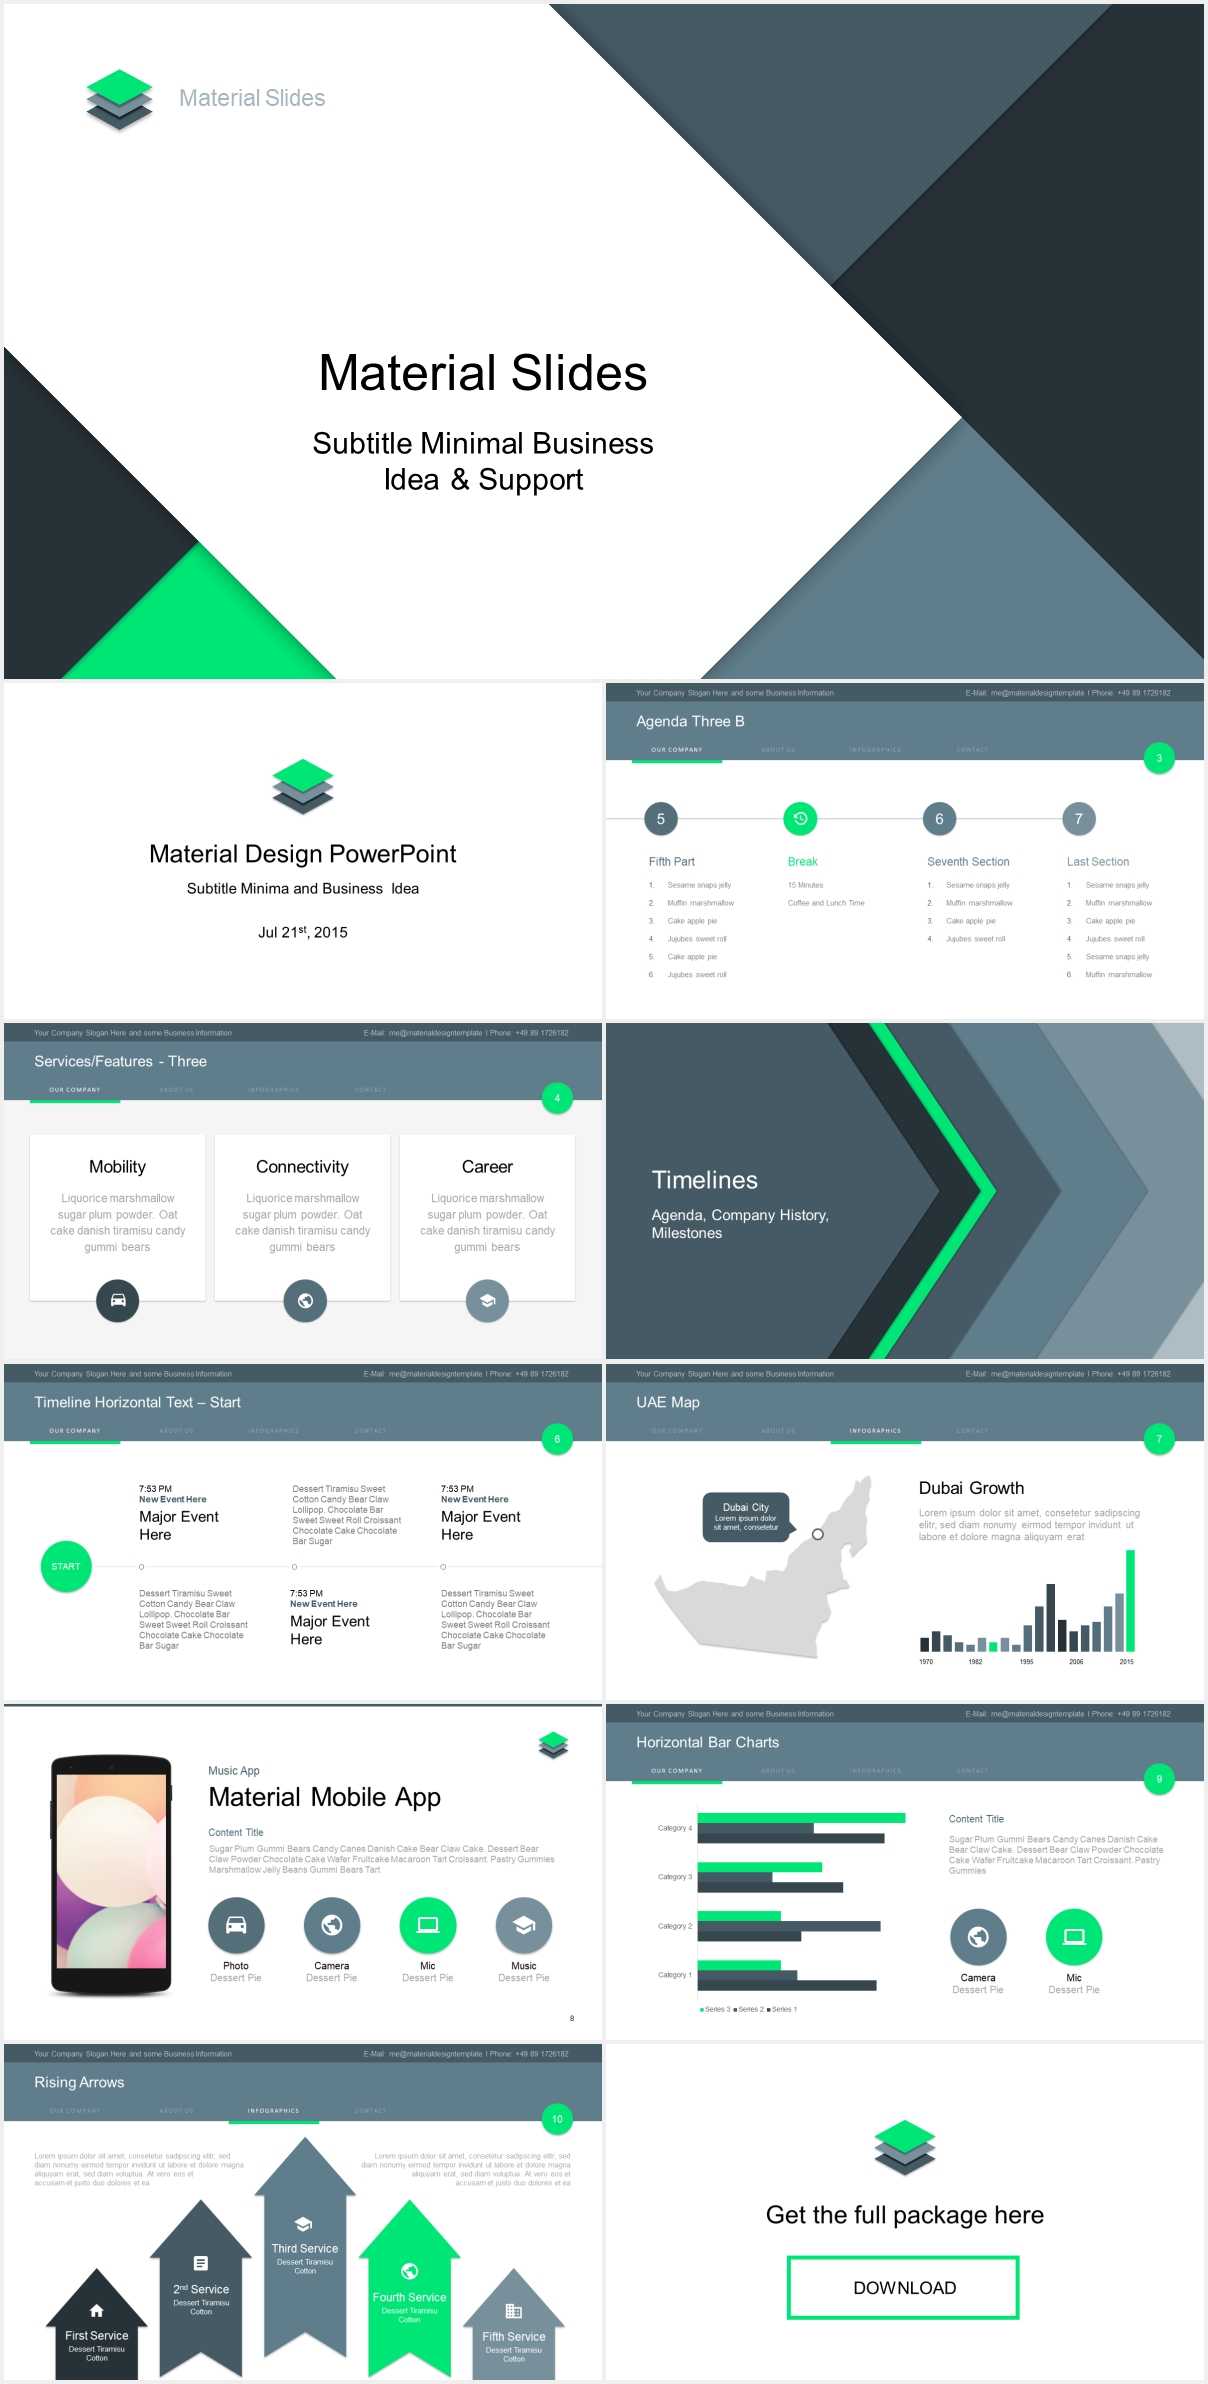 Material Design Powerpoint Template – Just Free Slides With Powerpoint Slides Design Templates For Free